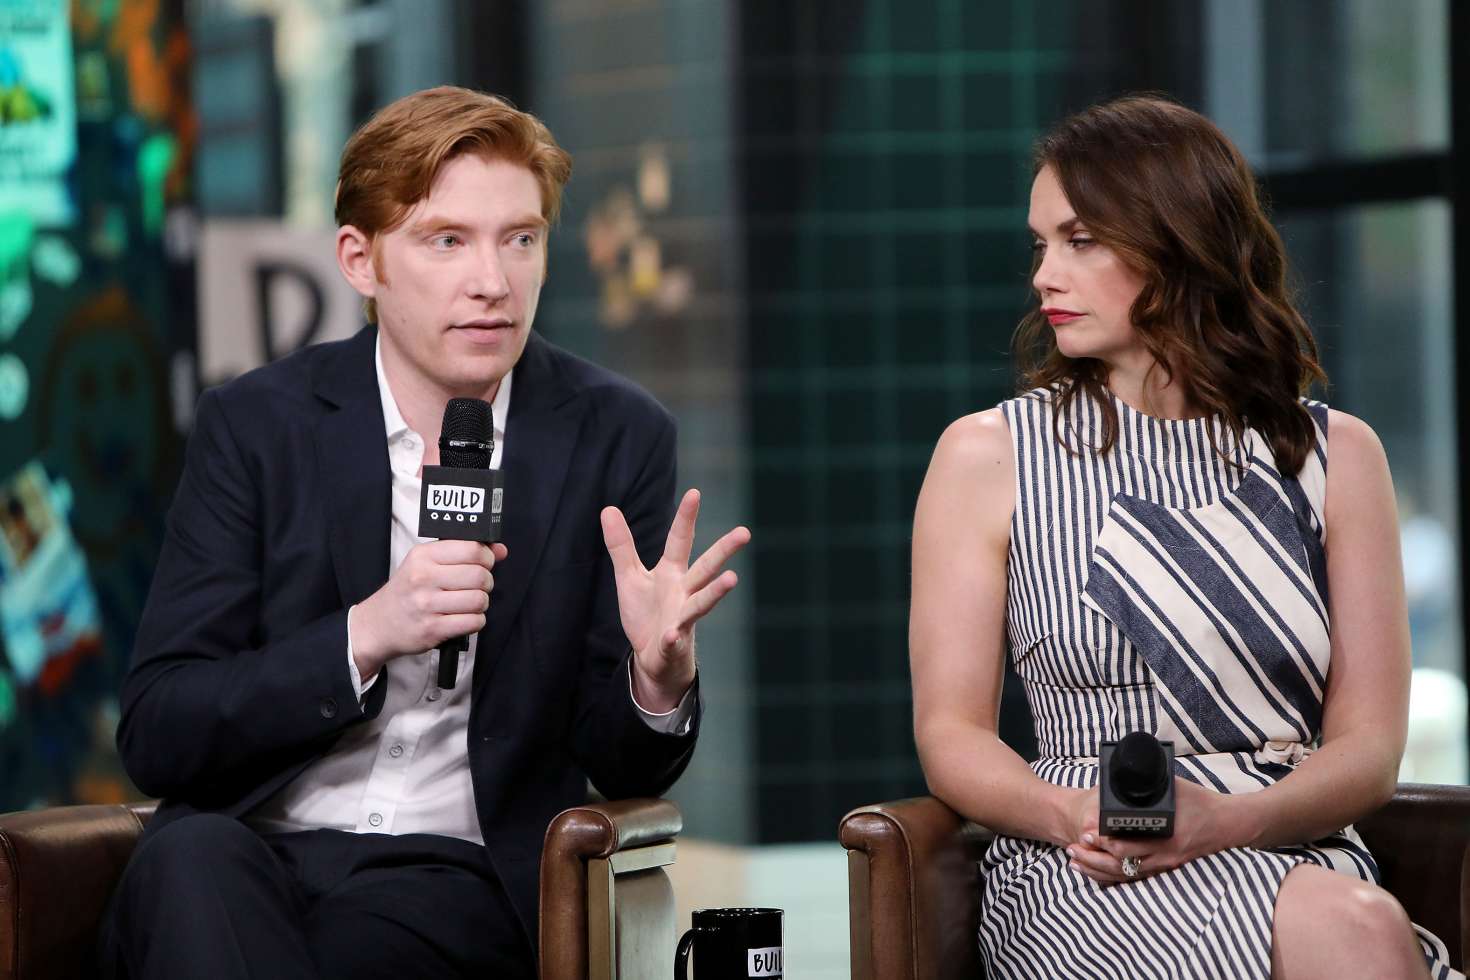 Ruth Wilson at AOL Build Speaker Series in New York